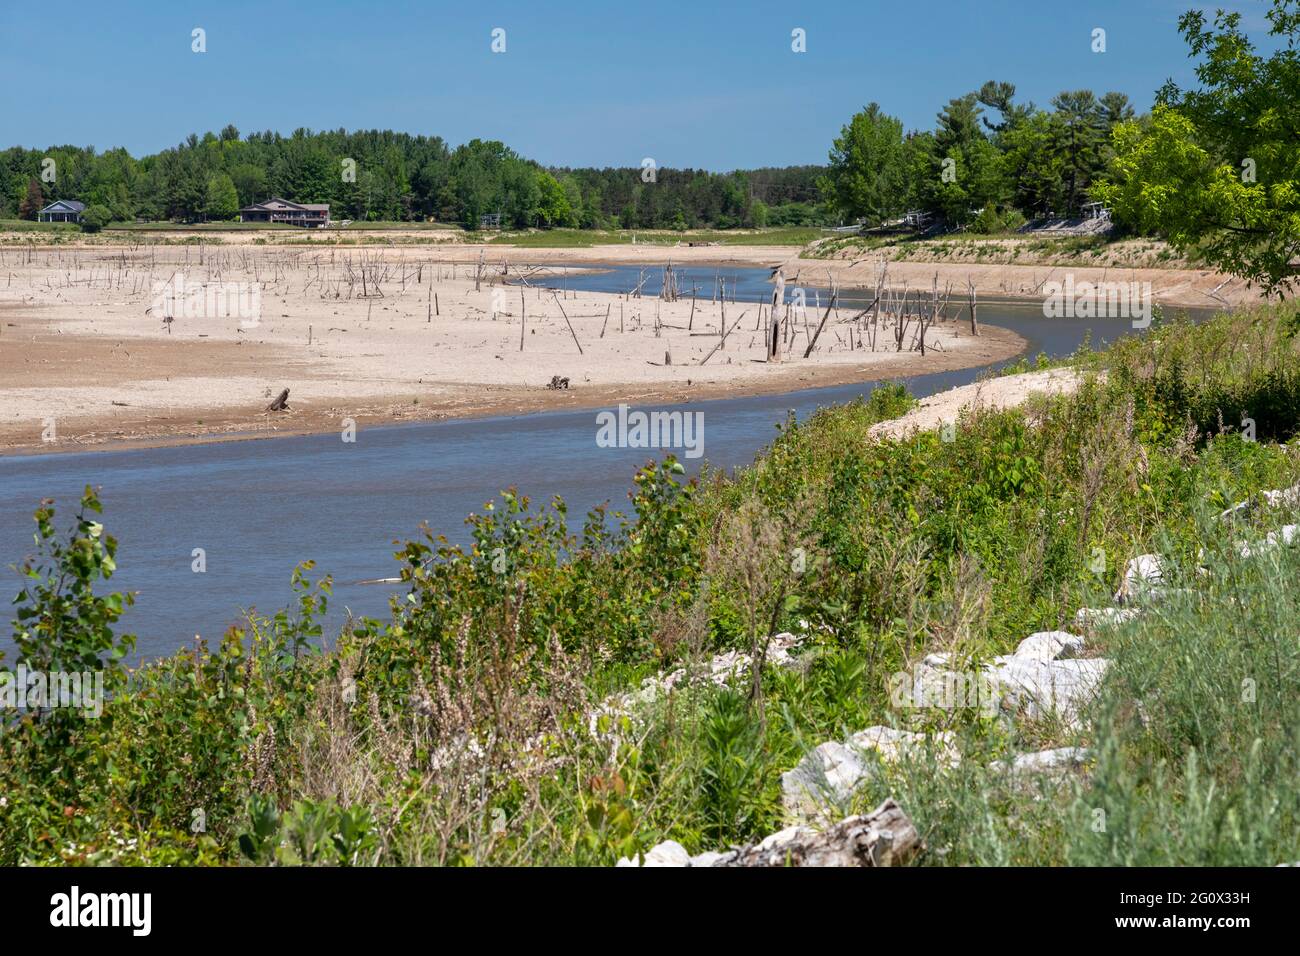 Edenville, Michigan - The aftermath of 2020 flooding on the Tittabawassee and Tobacco Rivers, which breached poorly-maintained dams and drained Sanfor Stock Photo